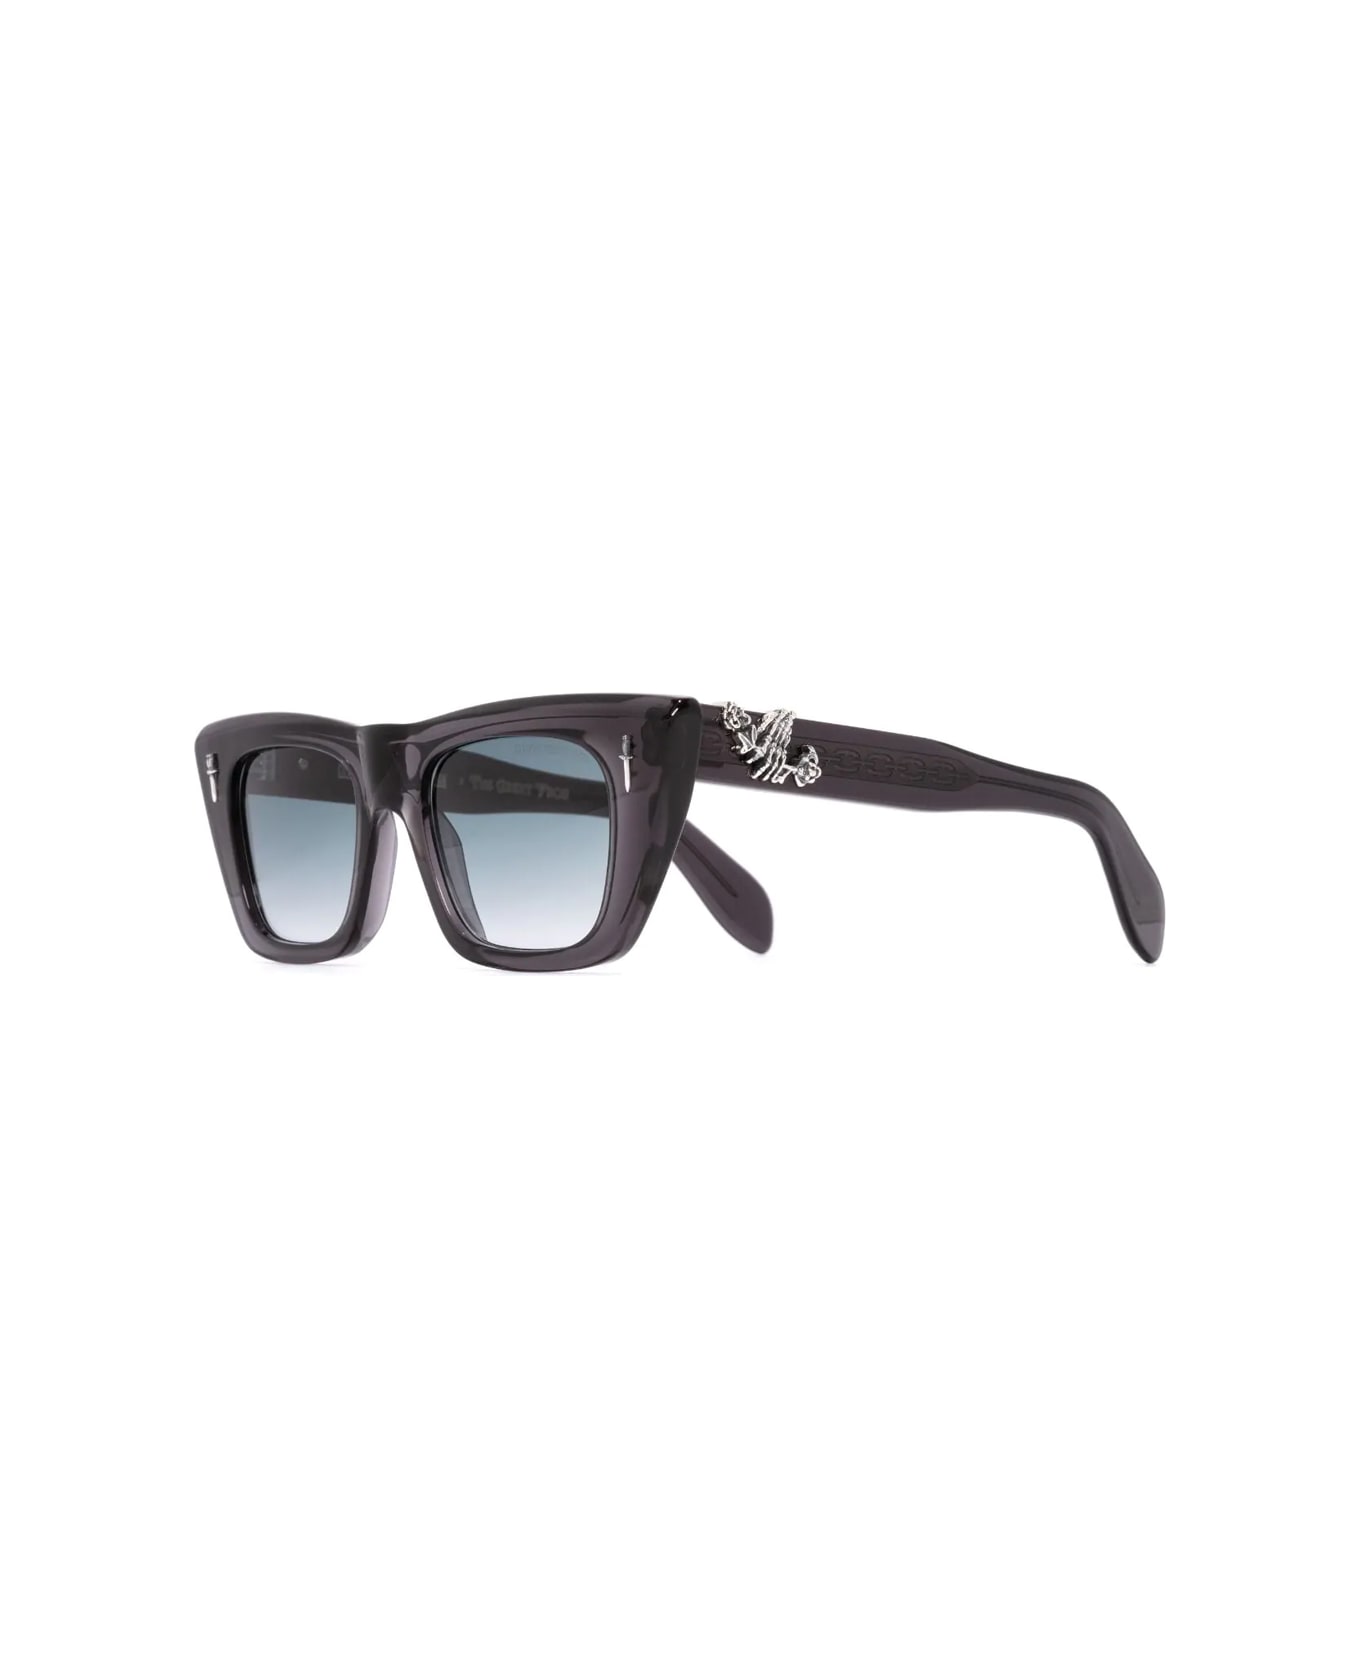 Cutler and Gross The Great Frog 008 03 Sunglasses - Grigio